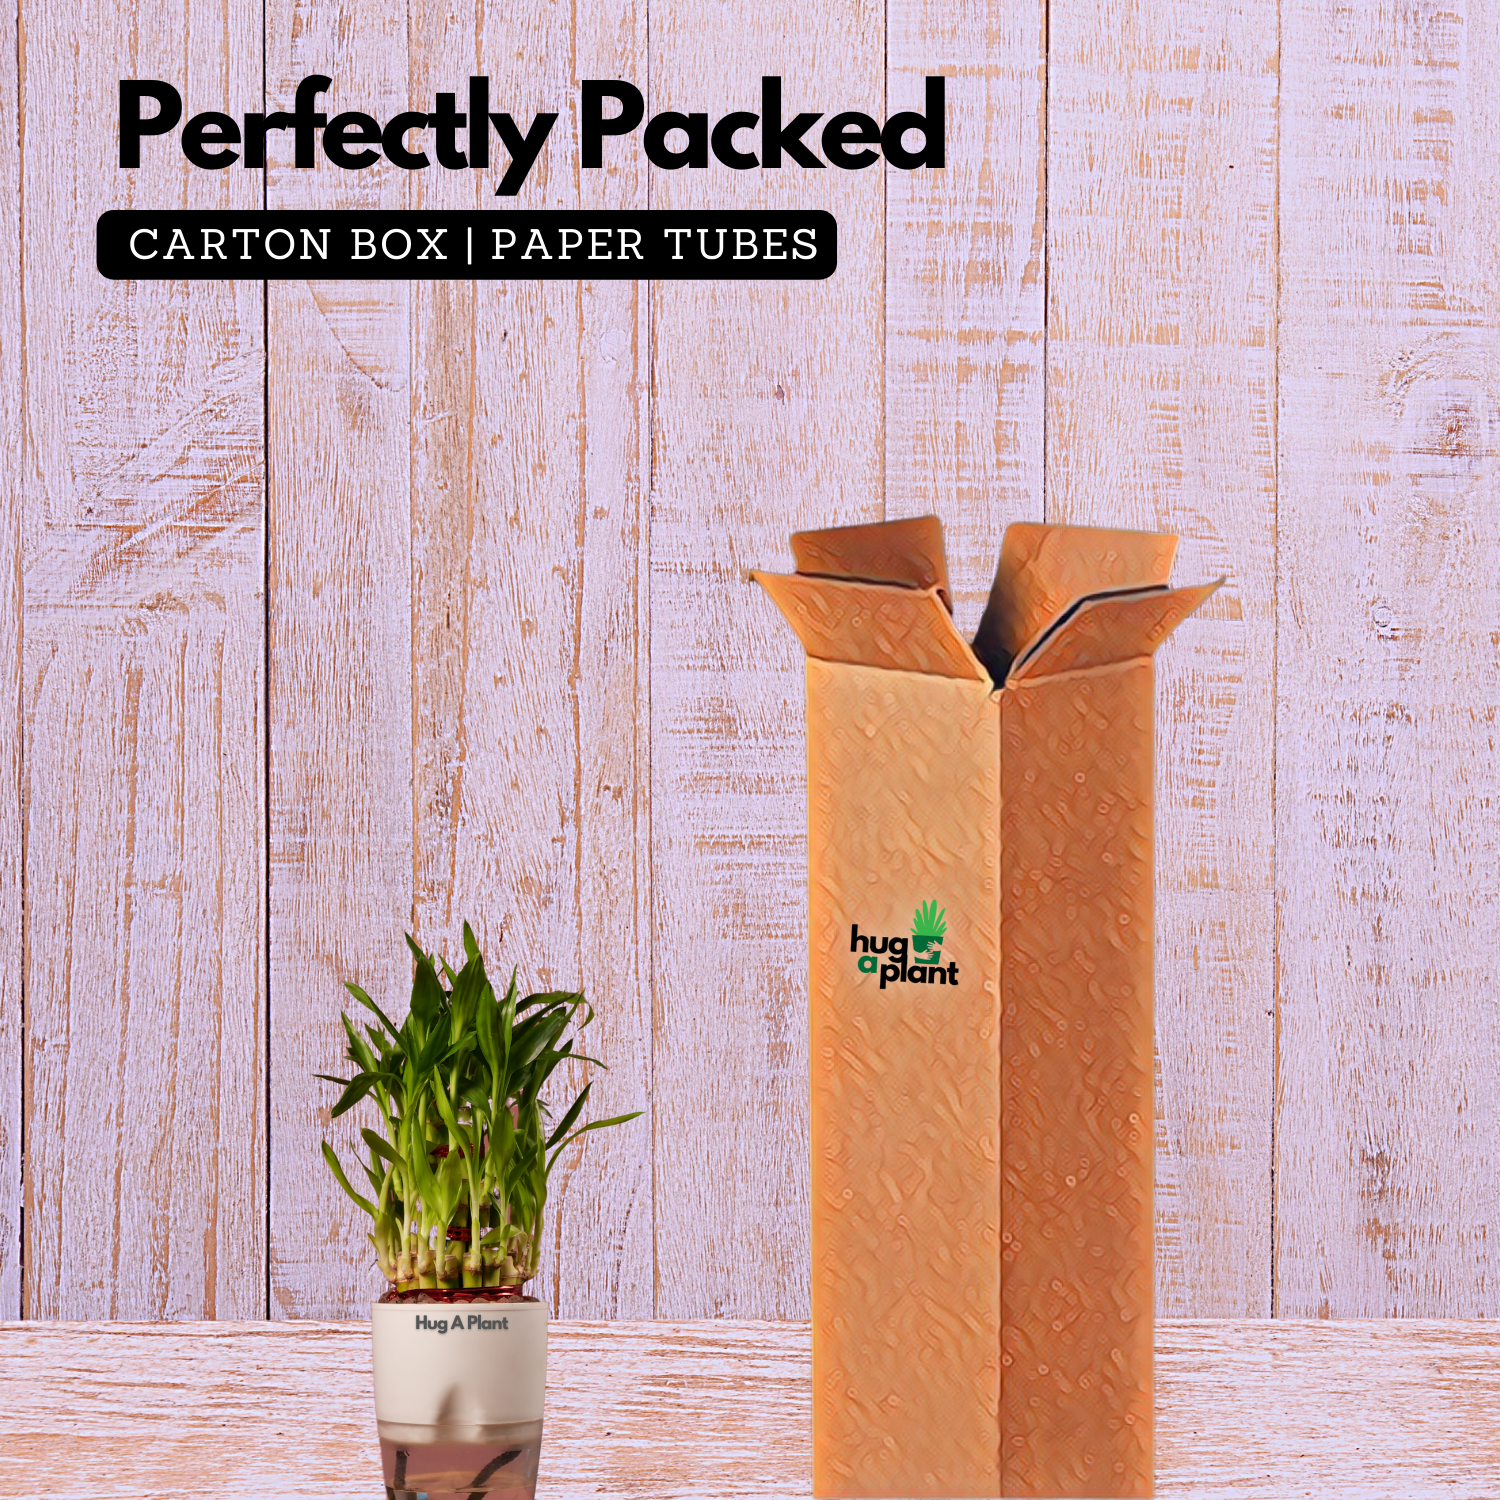 3 Layer Lucky Bamboo - Live Plant (With Self-Watering Pot & Plant)